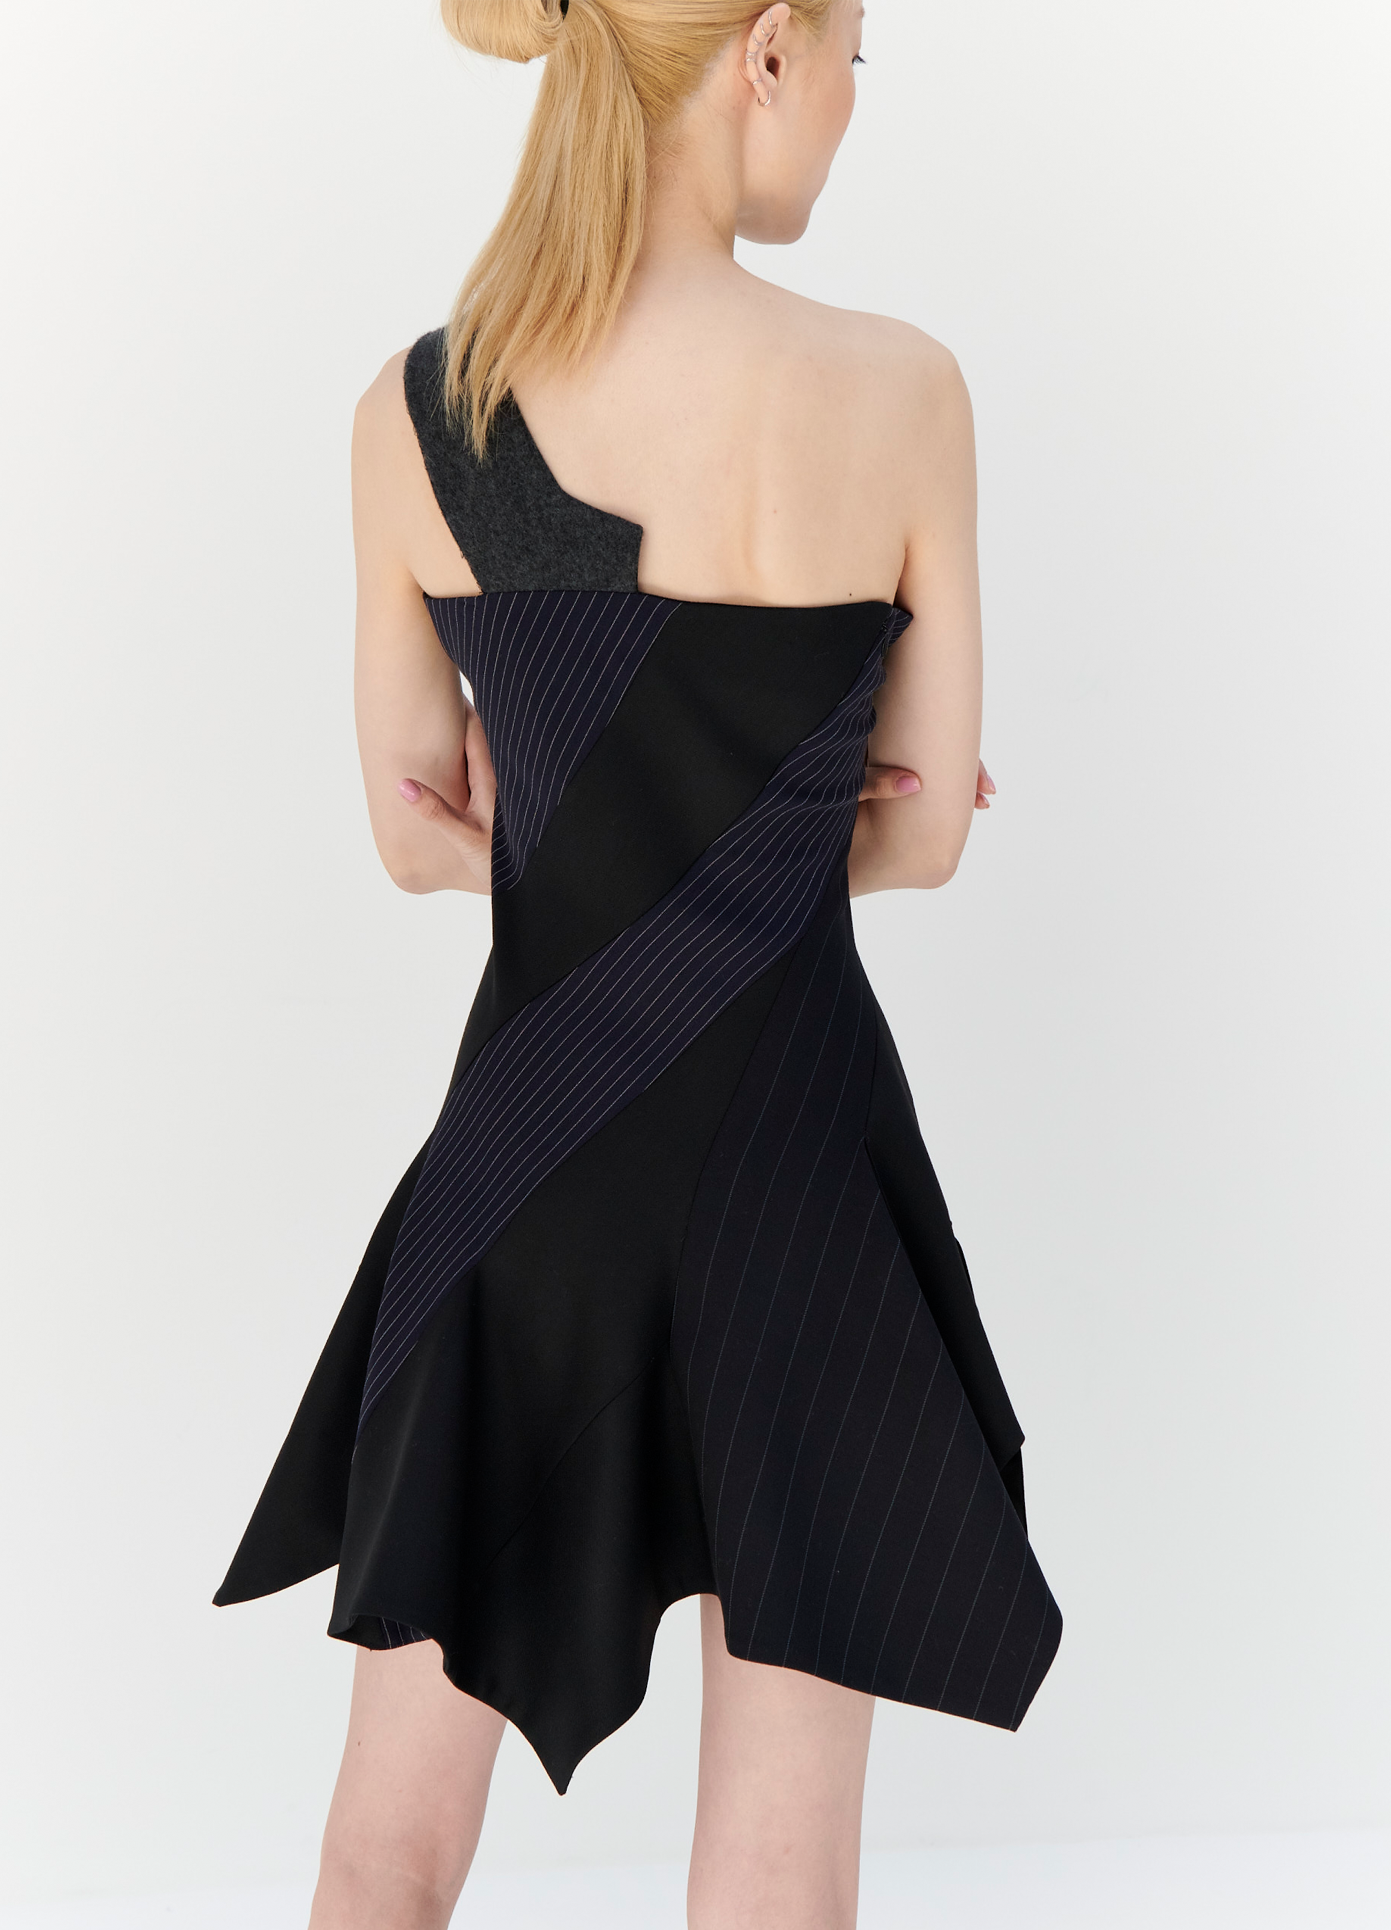 MONSE One Shoulder Tailored Dress in Midnight on model back view